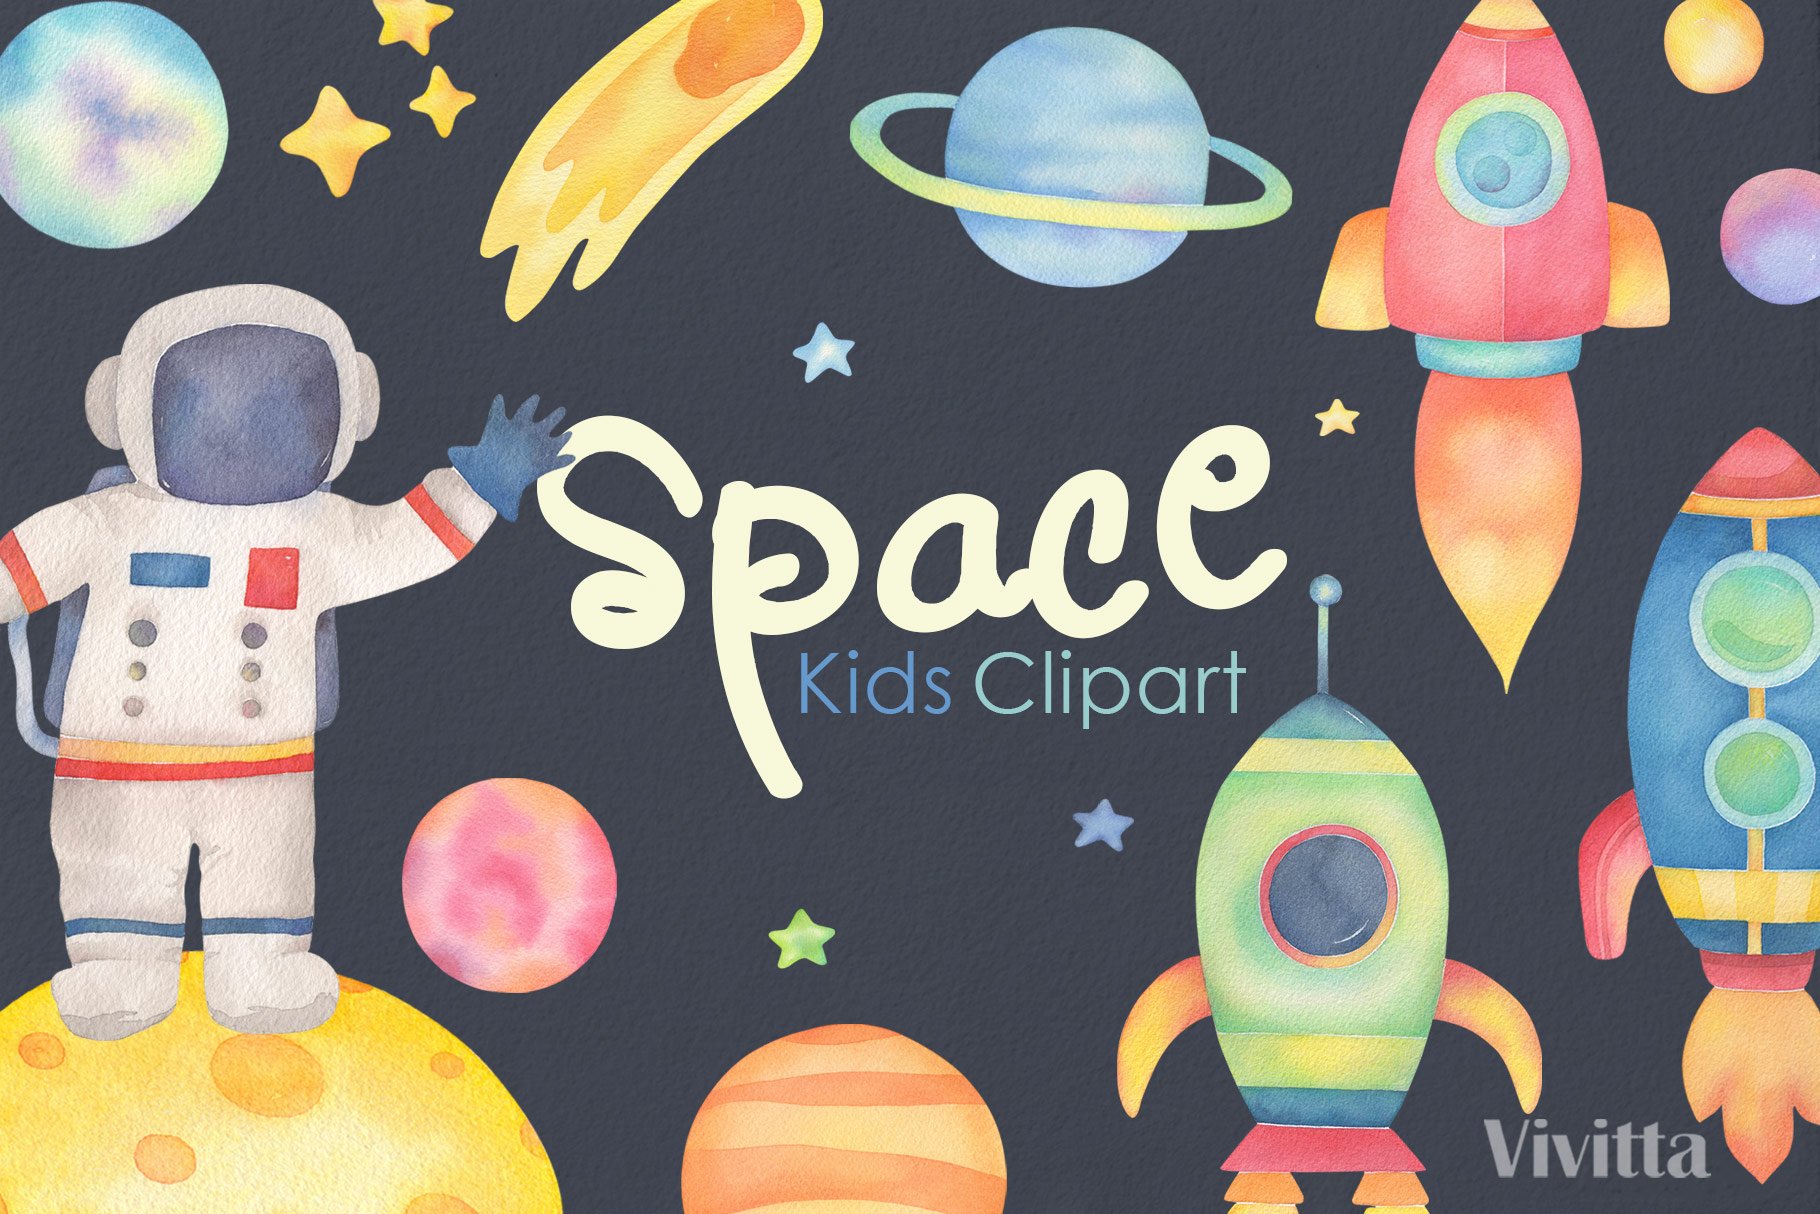 Space Rocket Kids Clipart watercolor cover image.